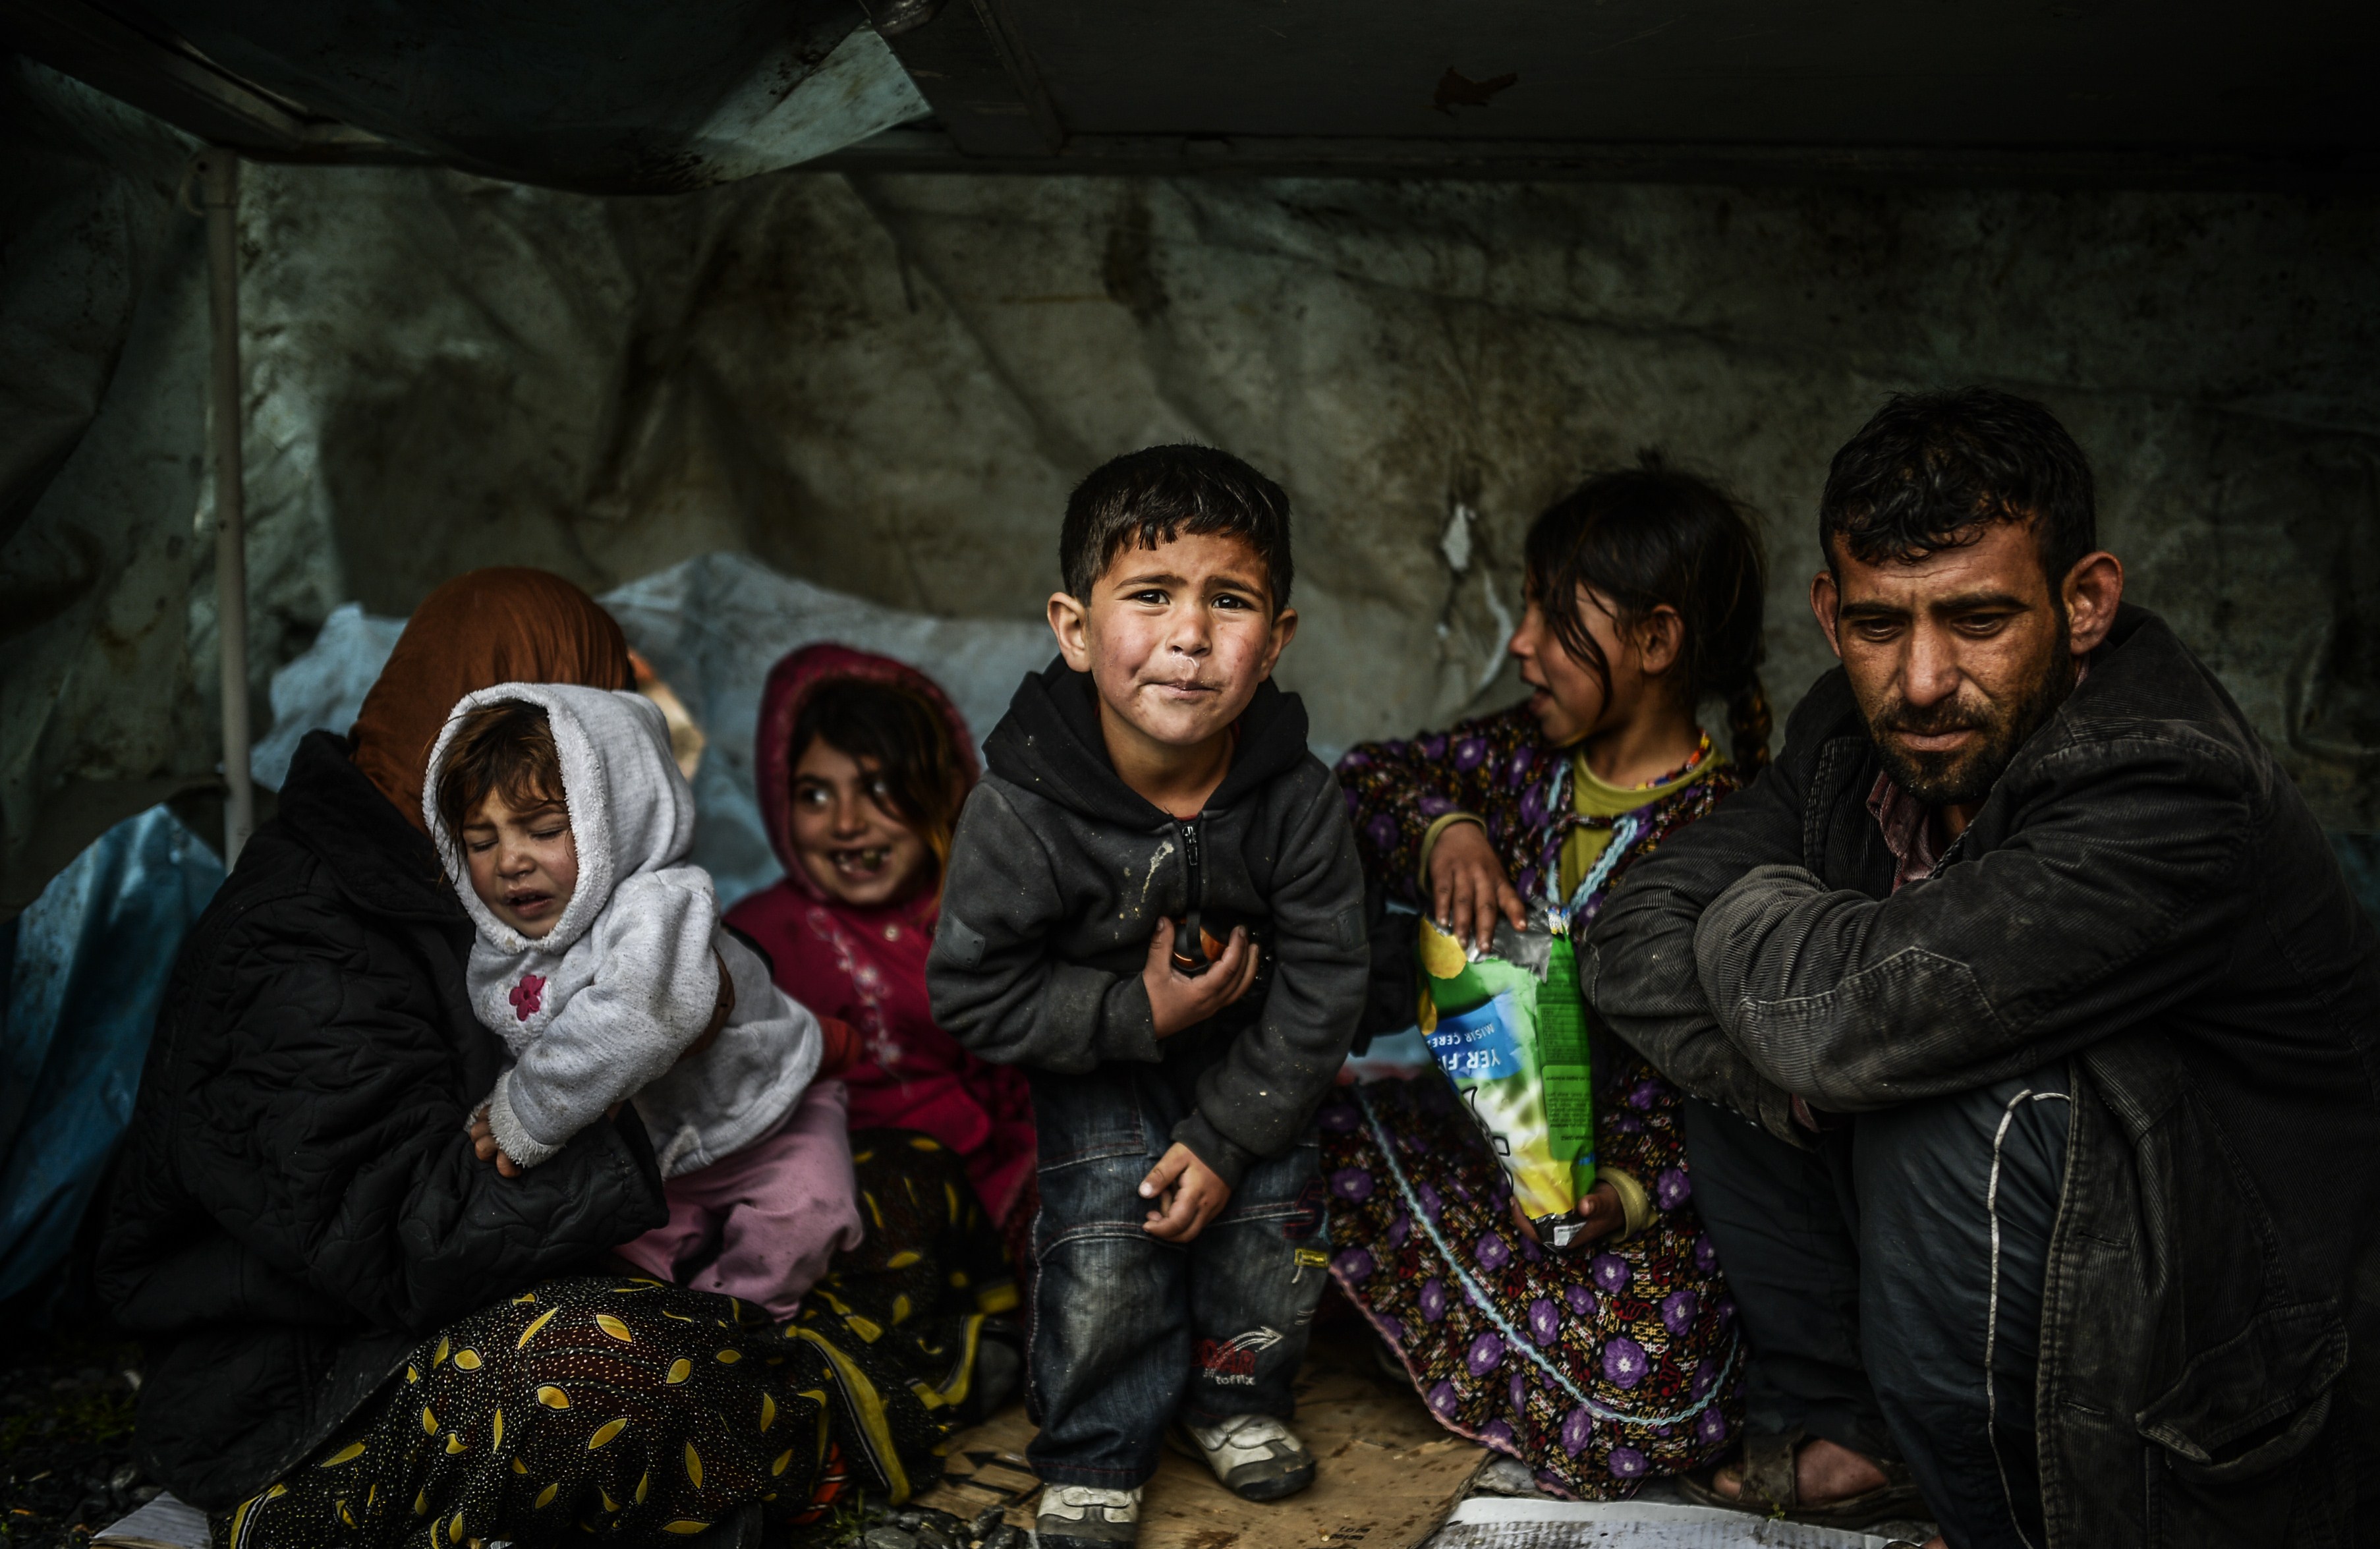 A Syrian refugee family from Aleppo stays under a shelter during a rainy day on March 8, 2014 in Uskudar, Istanbul. (Bulent Kilic—AFP/Getty Images)